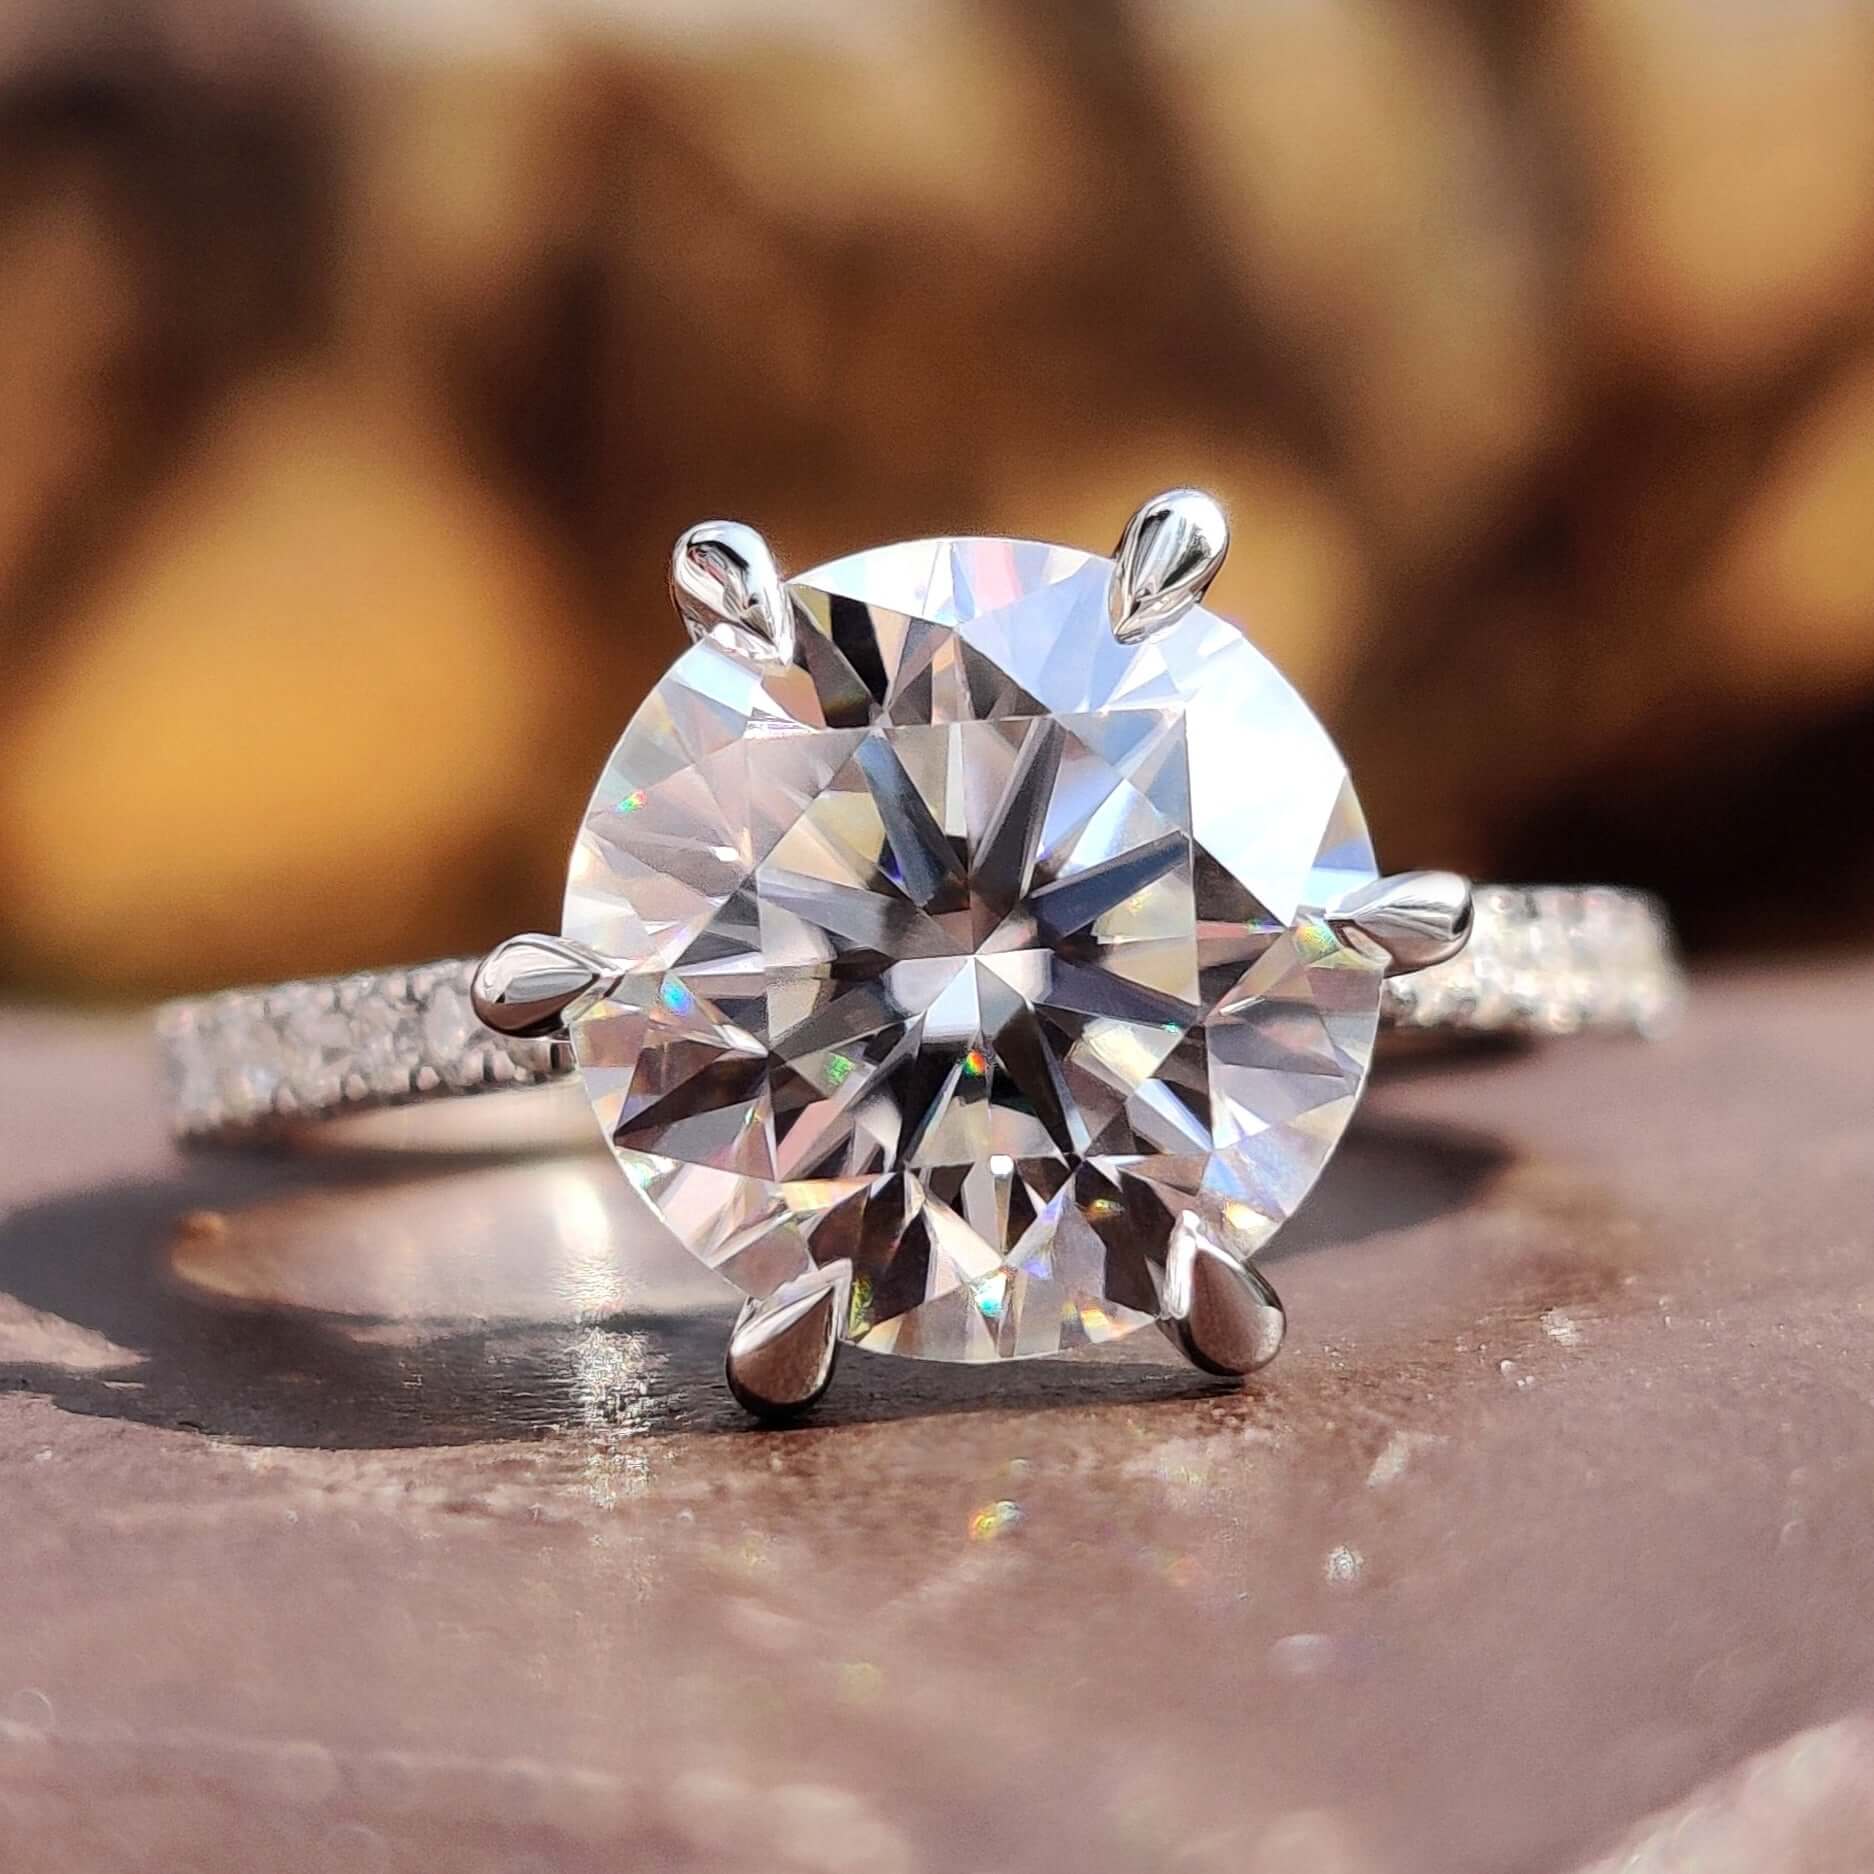 2 CT Round Hearts and Arrows Cut Colorless Moissanite Engagement Ring